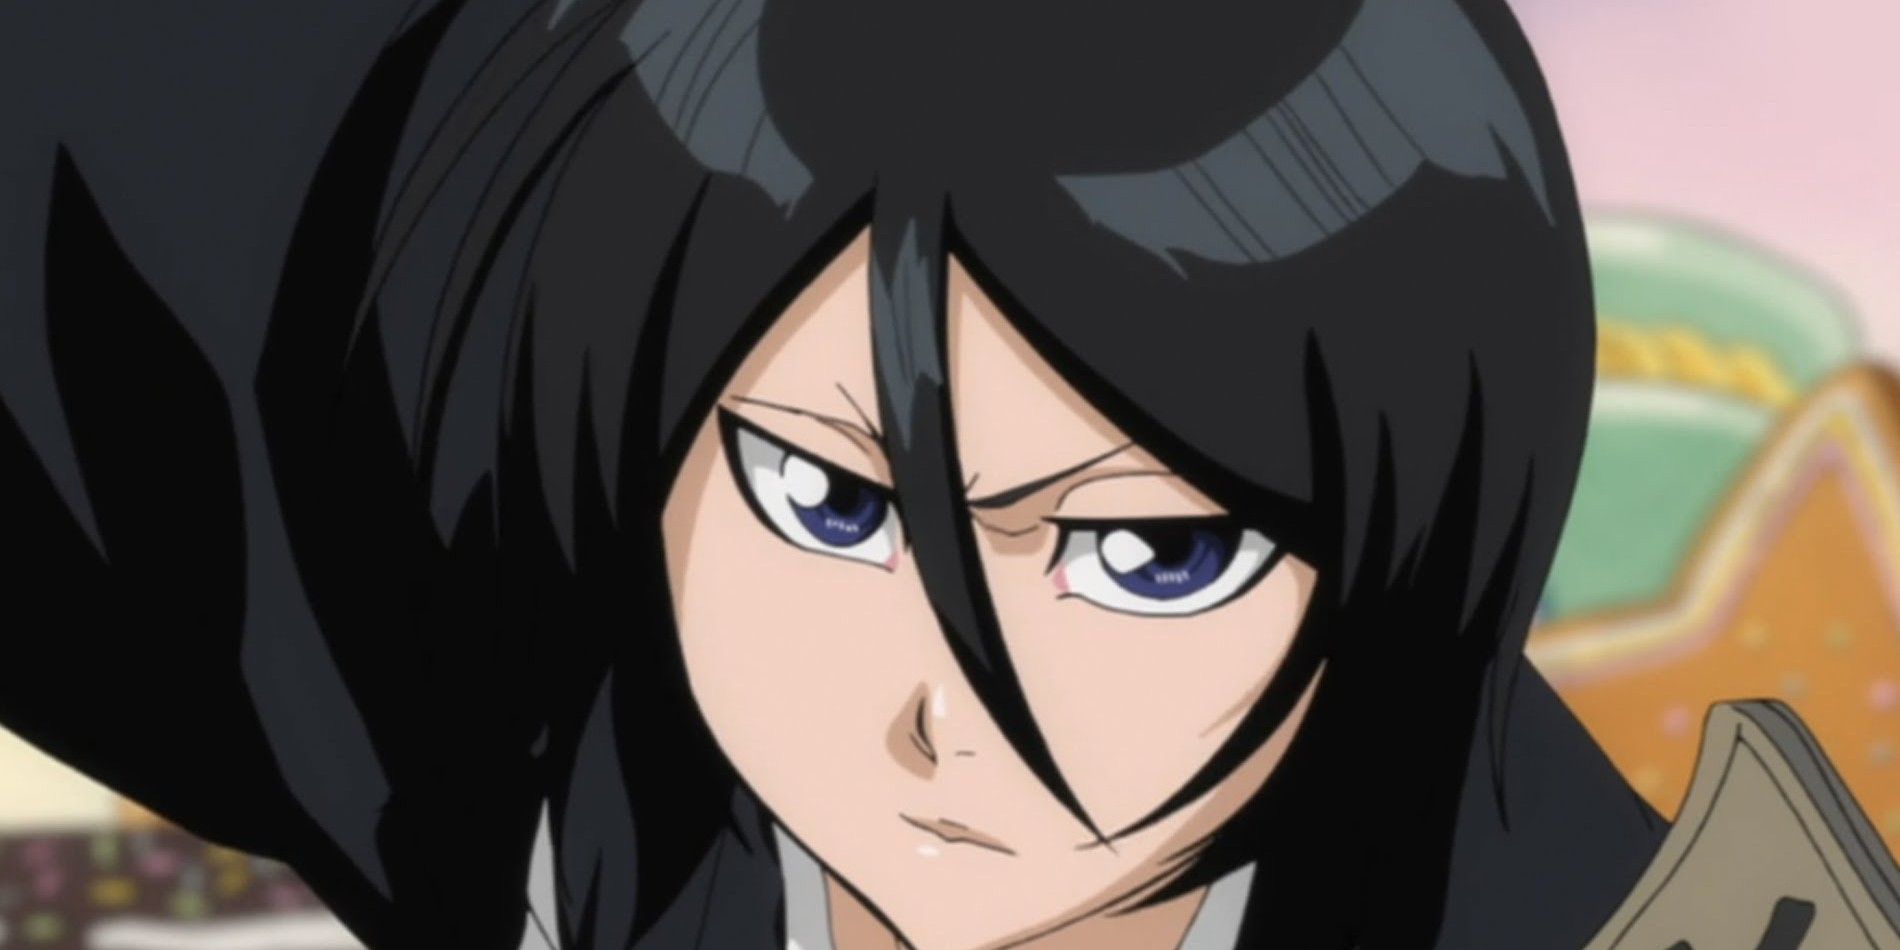 Where to Watch Bleach Episode 6 of the "Thousand Year Blood War" Arc?